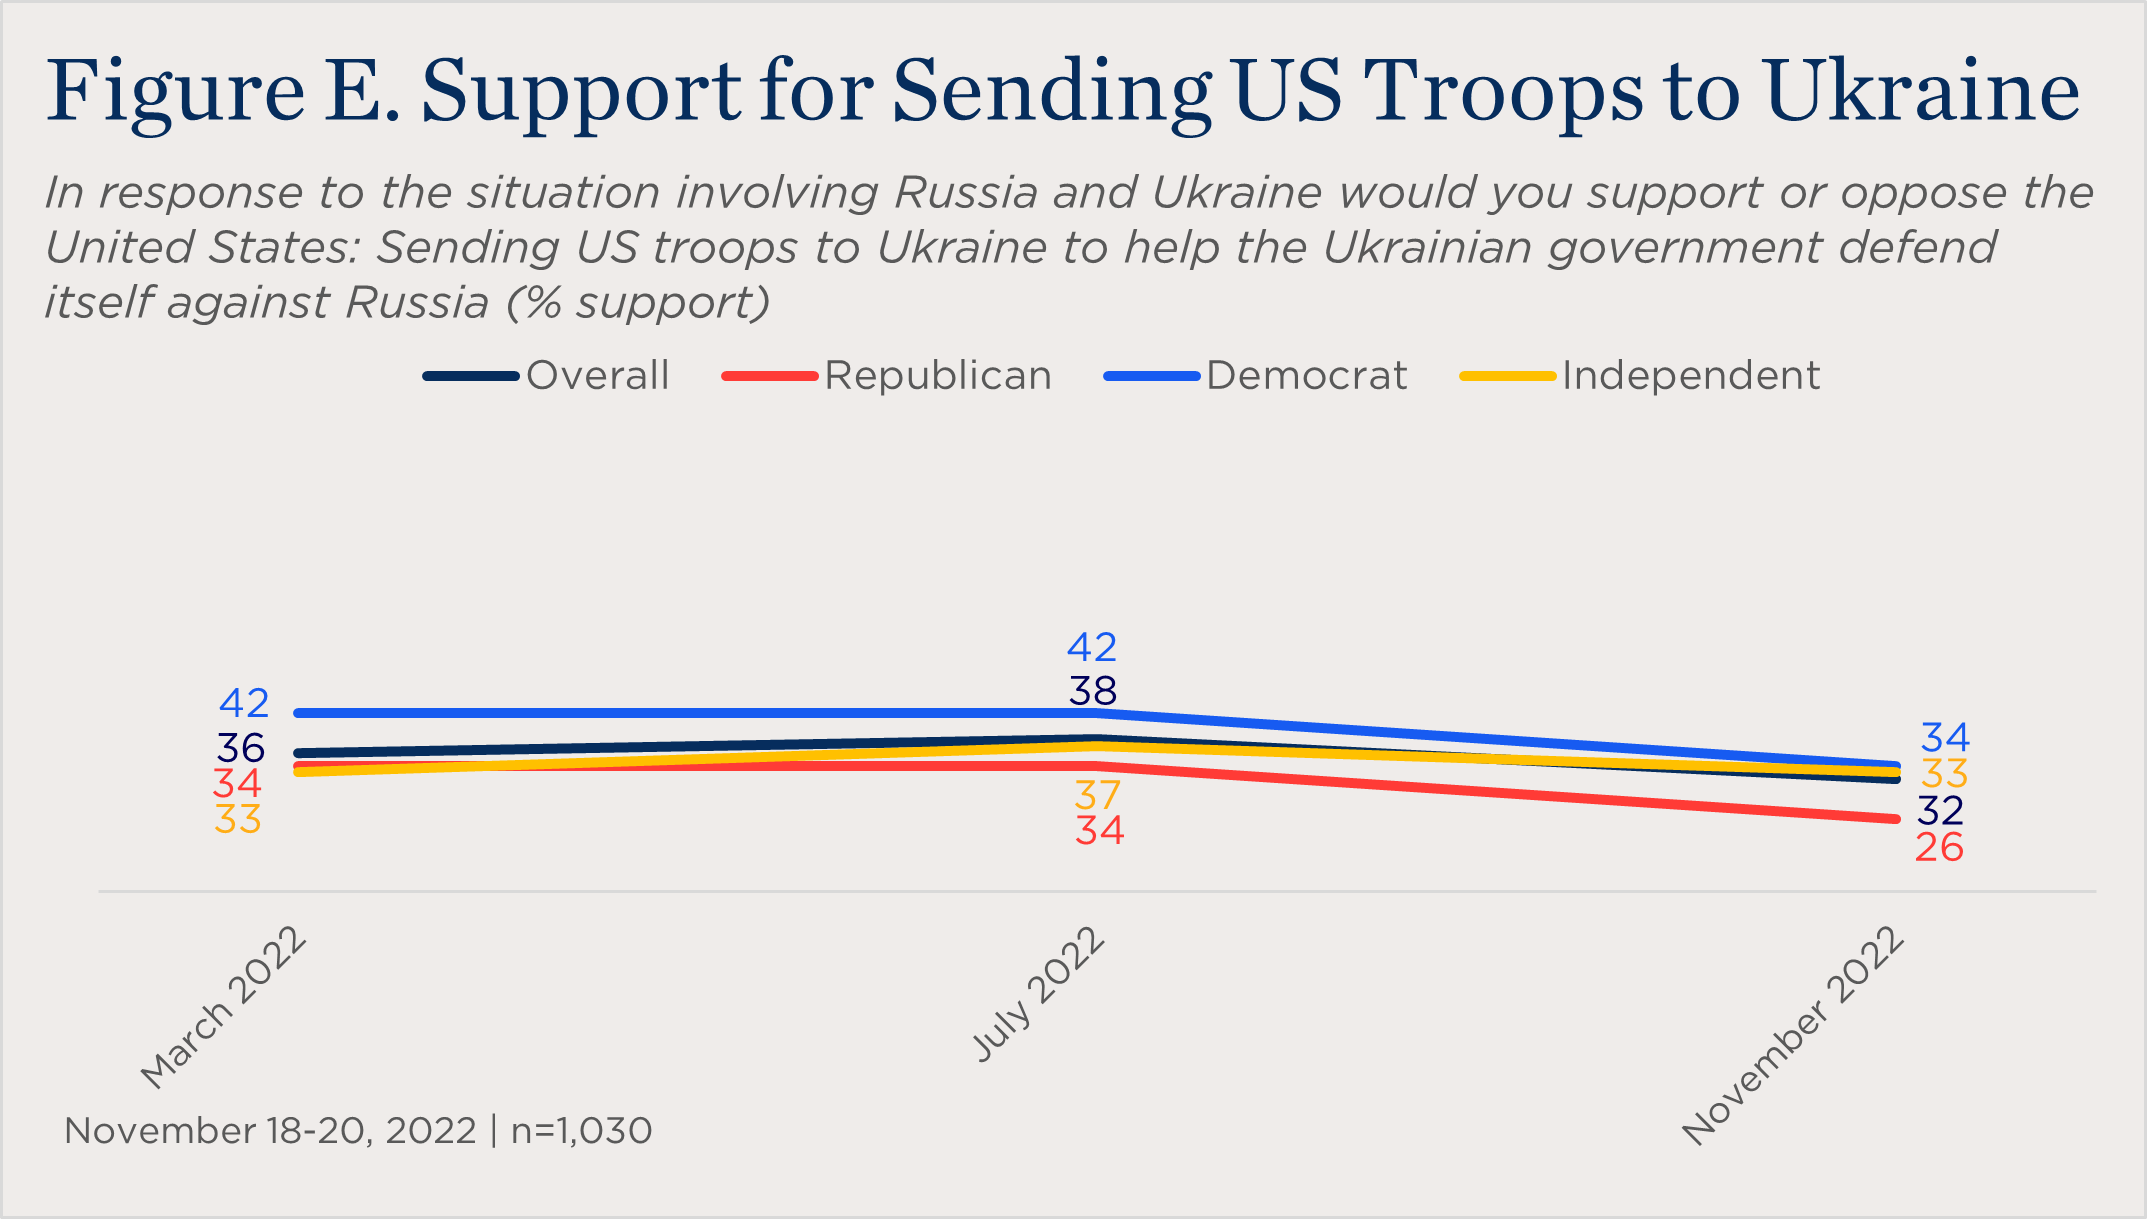 "line chart showing partisan support for sending US troops to Ukraine"